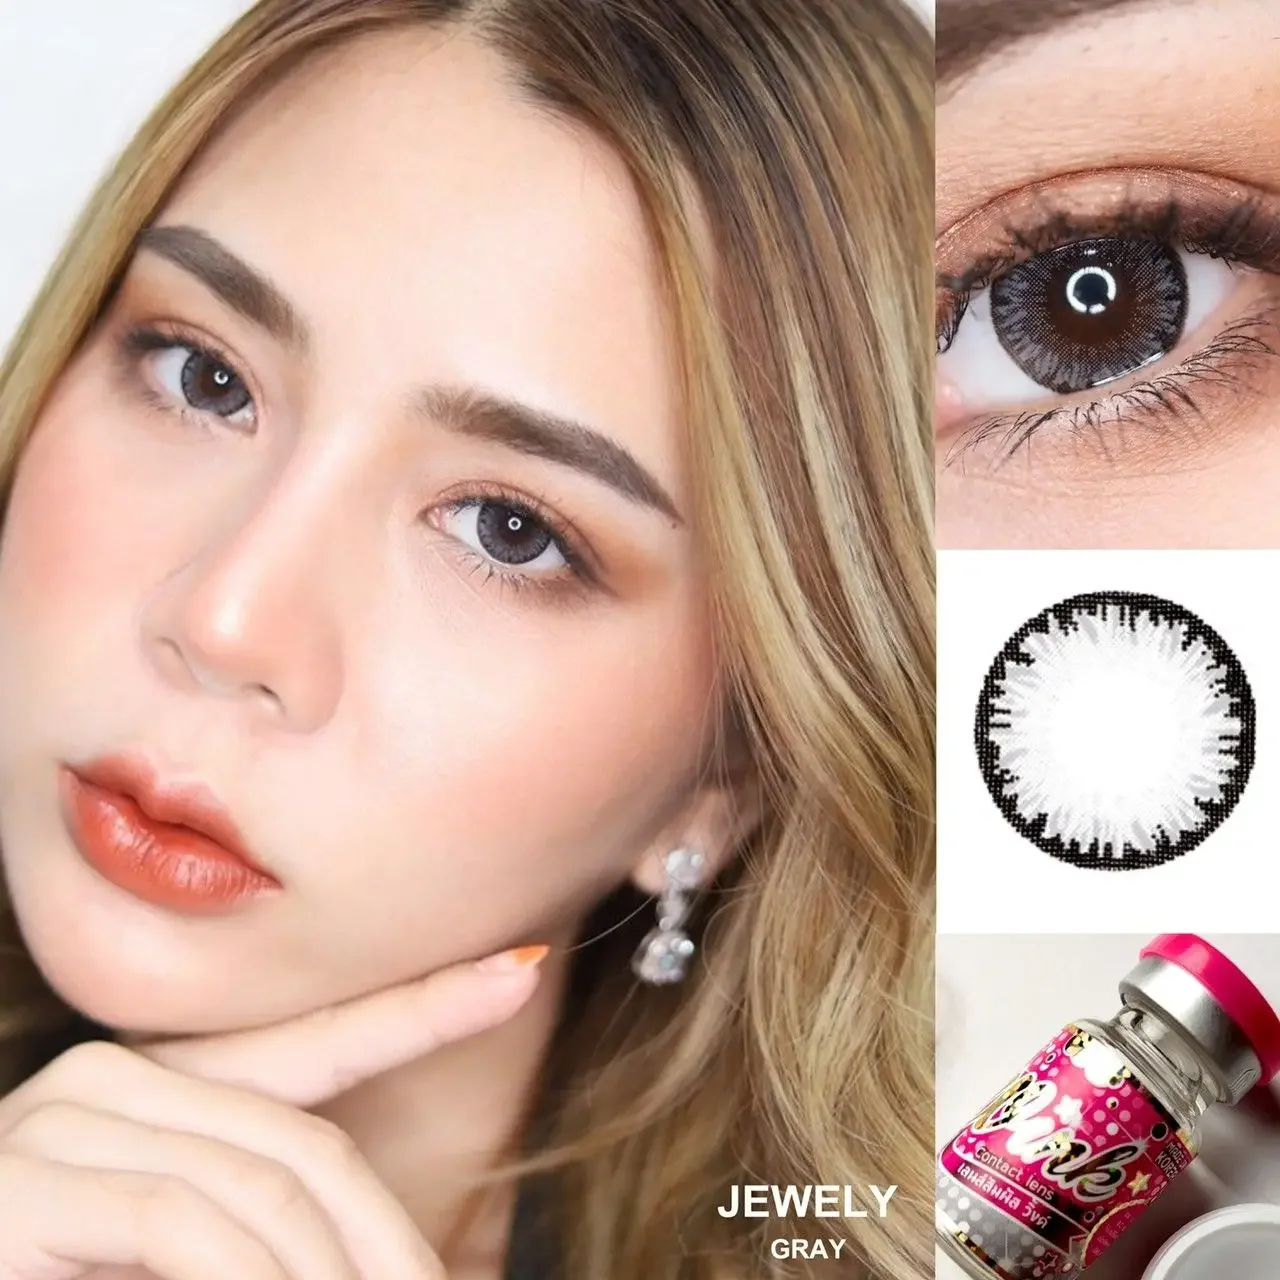 Jewely 14.5mm Gray Plano Wink Contact Lens